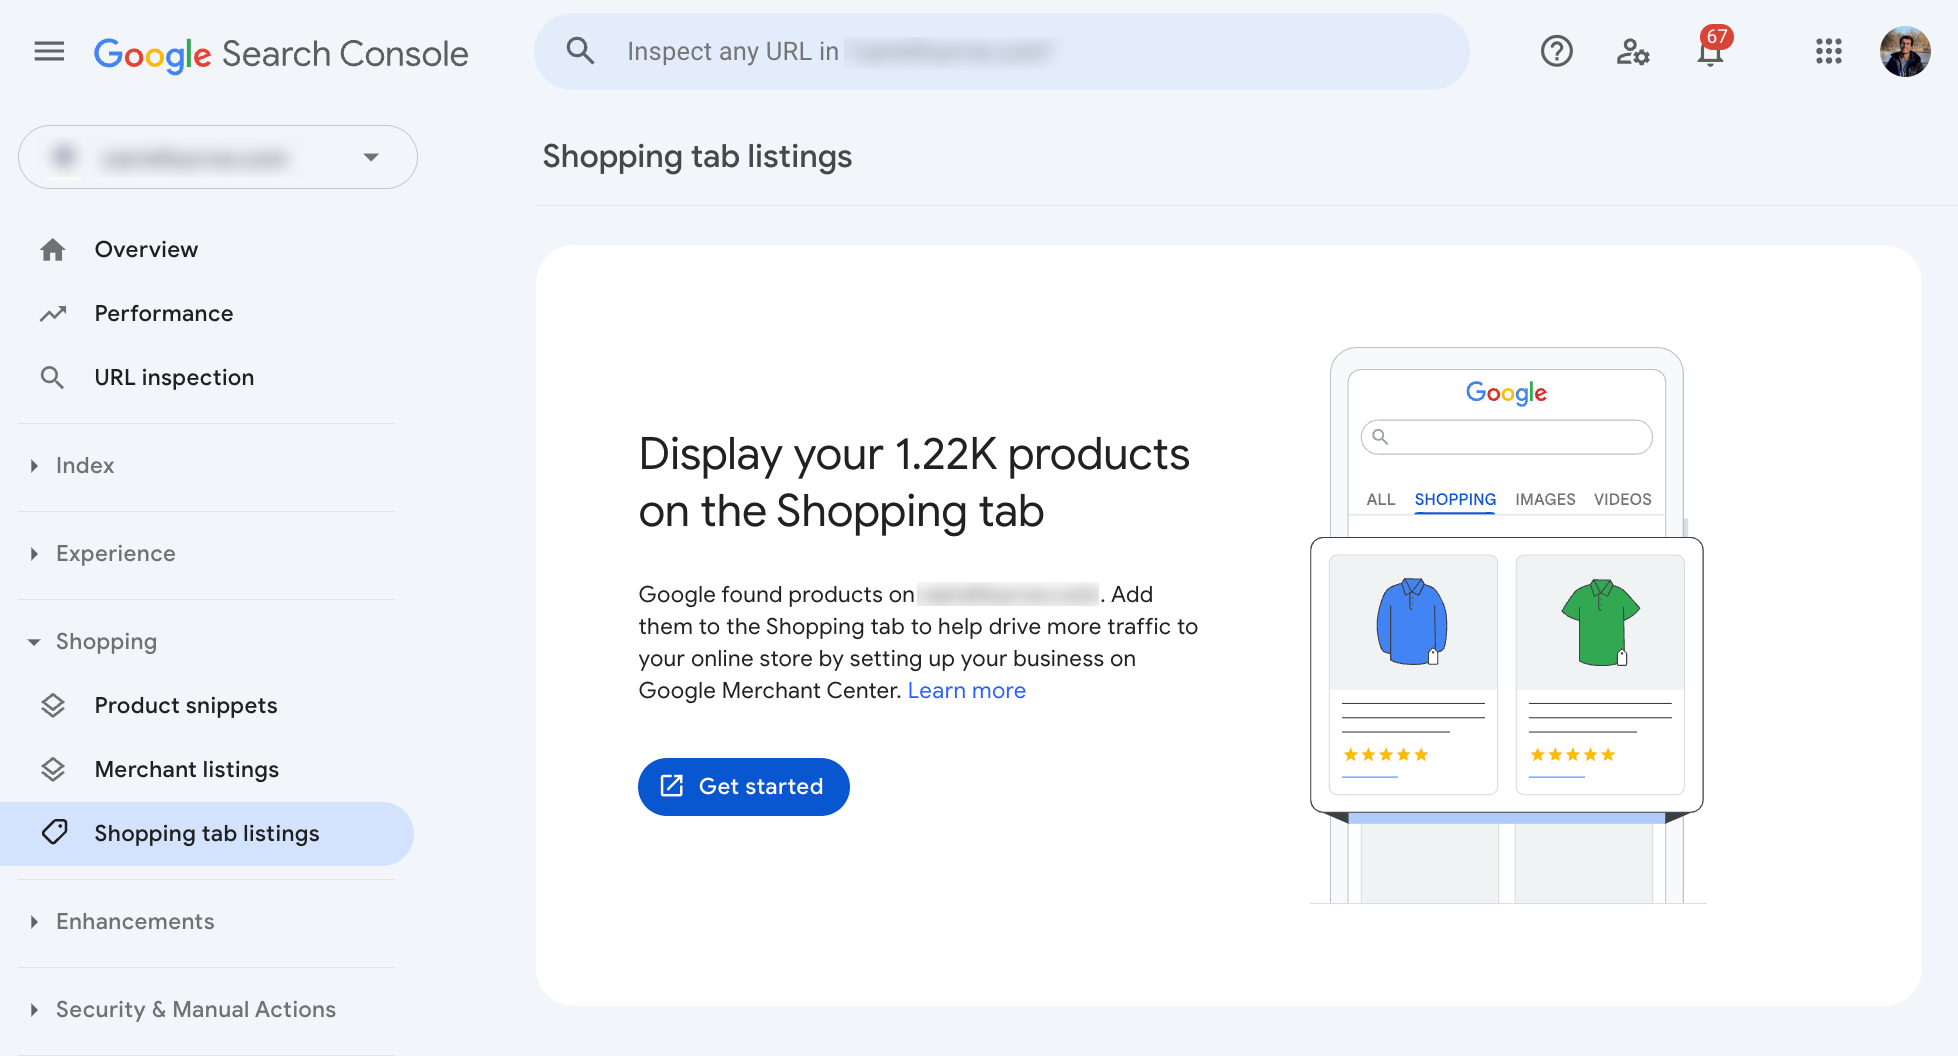 Search Console Shopping tab listings report